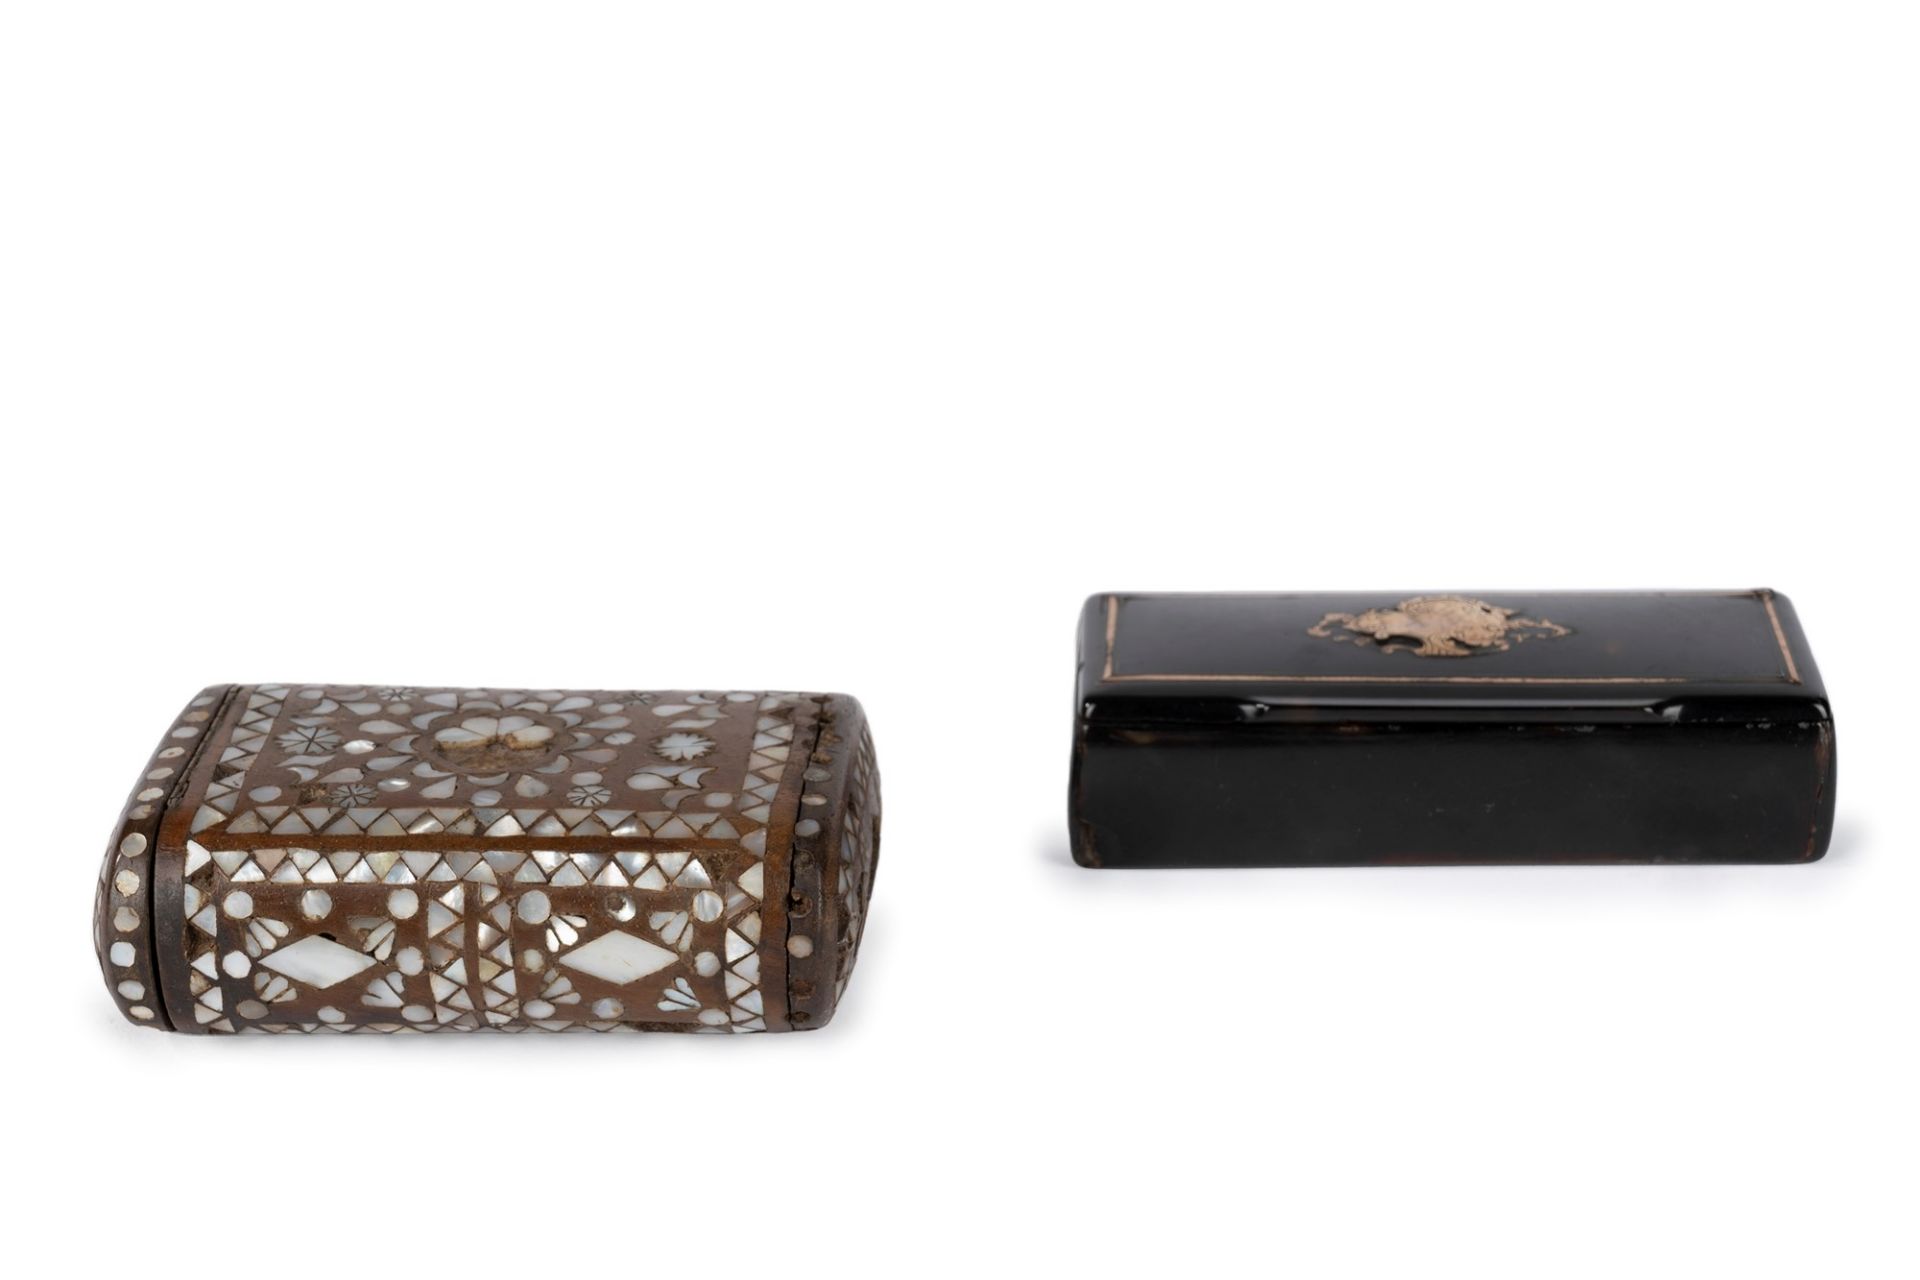 Lot consisting of a small wooden and mother-of-pearl box and another black one, 19th century - Image 8 of 8